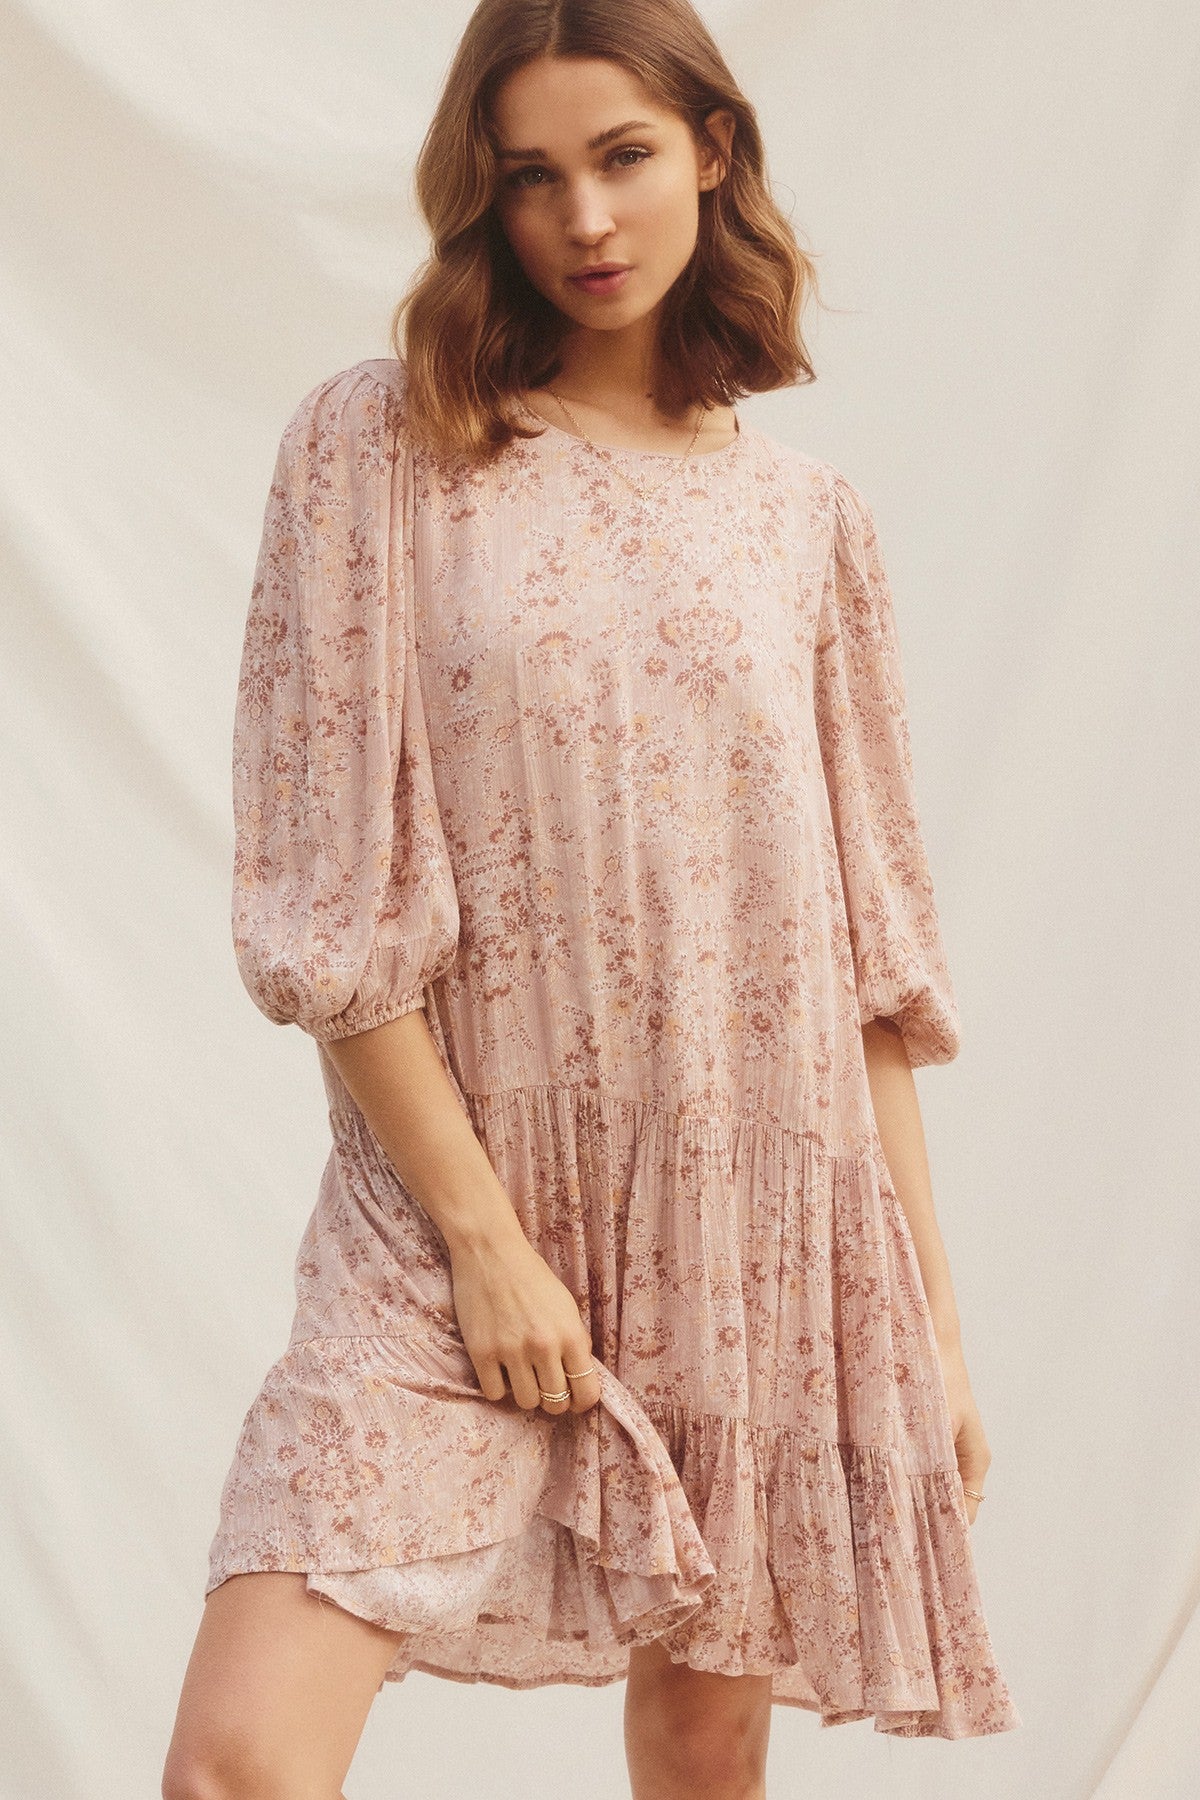 The Paisley Dress in Dusty Blush